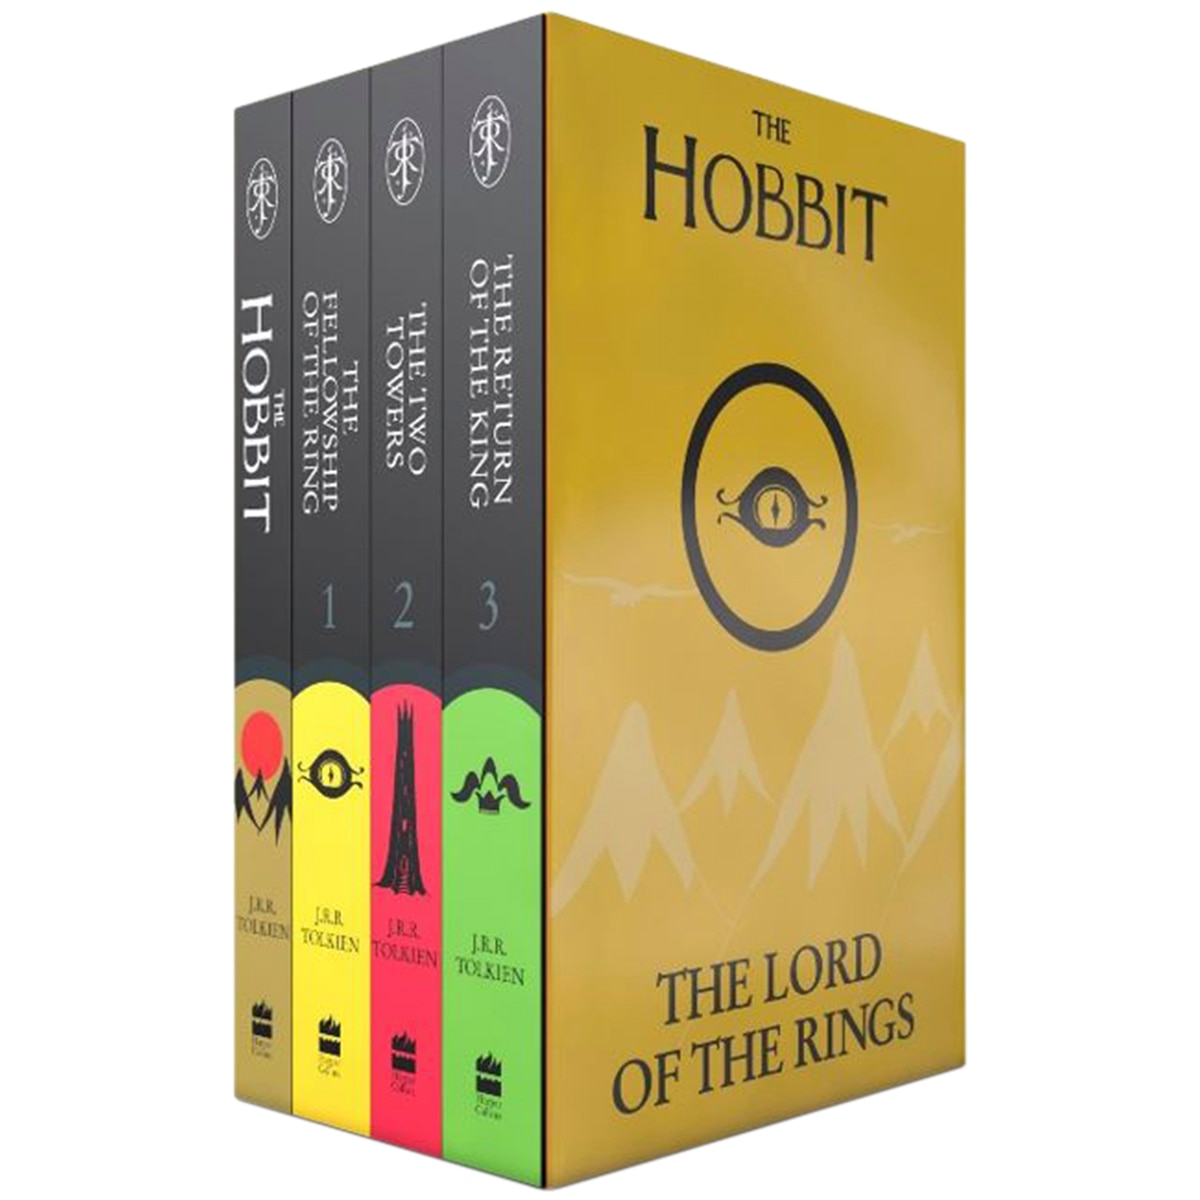 The Hobbit and The Lord of the Rings Boxset